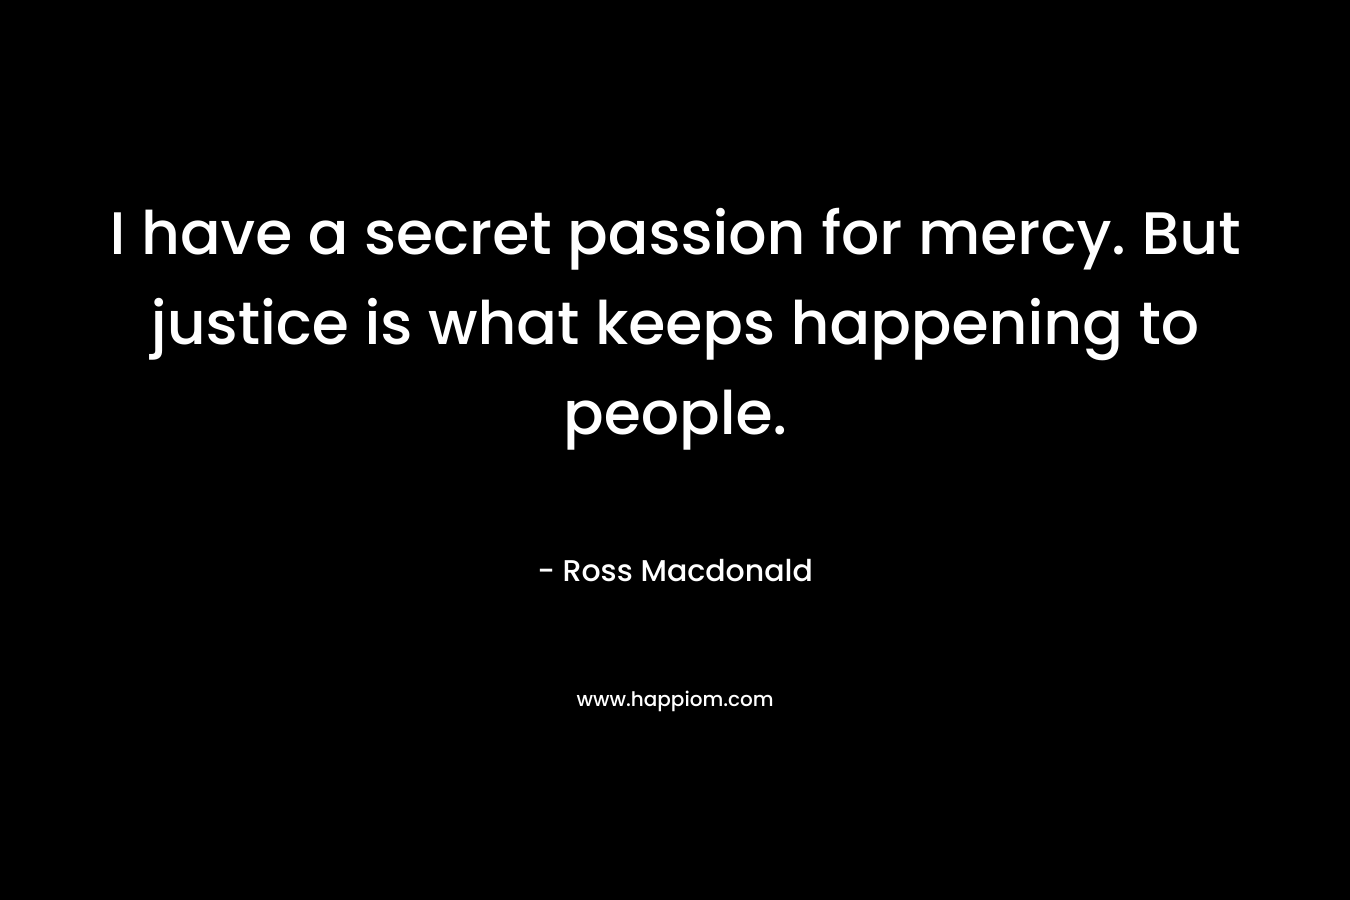 I have a secret passion for mercy. But justice is what keeps happening to people. – Ross Macdonald